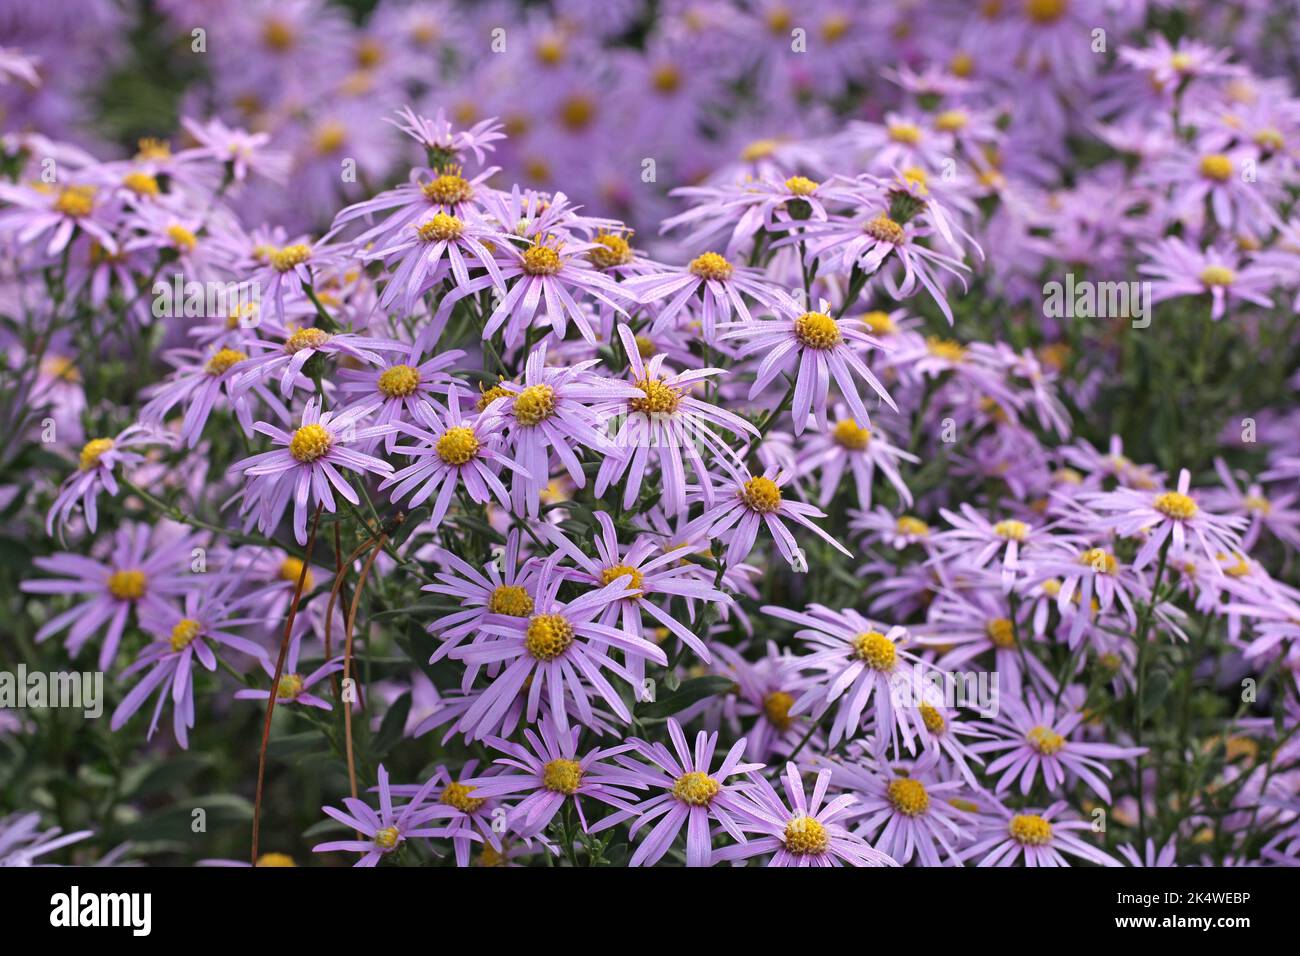 Aster 'Cotswold Gem' in flower. Stock Photo